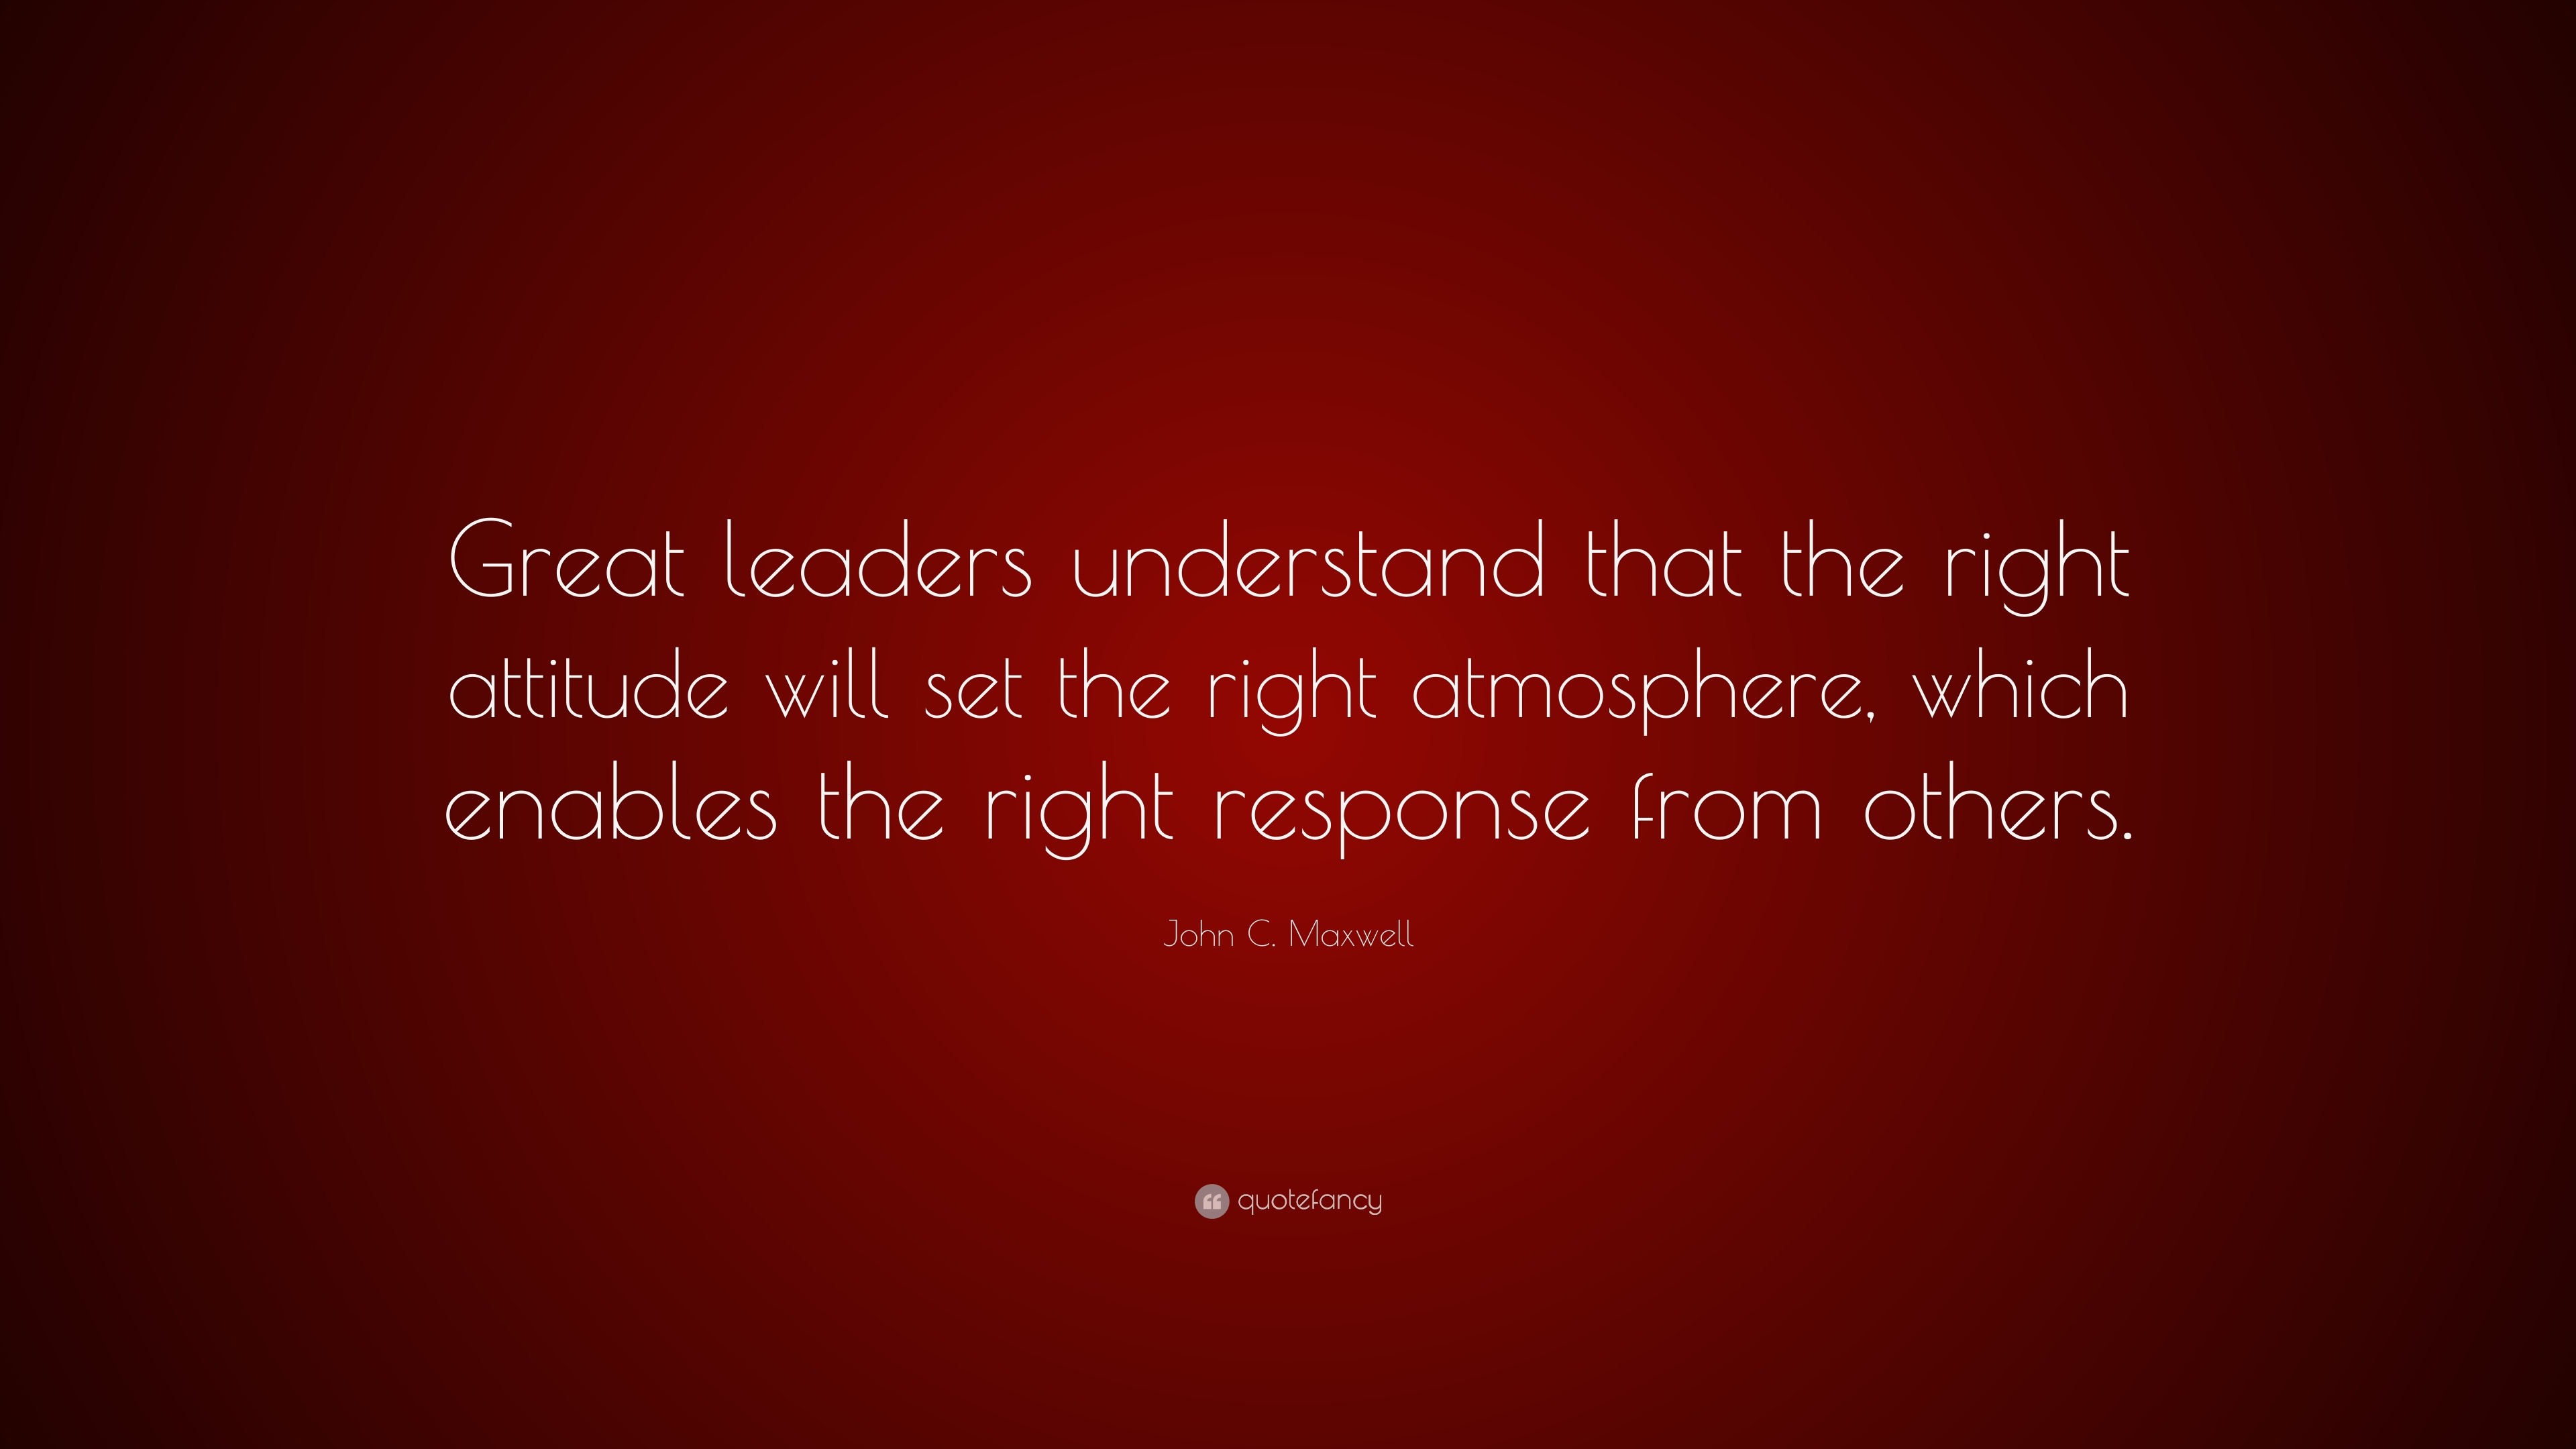 John C. Maxwell Quote: “Great leaders understand that the right ...